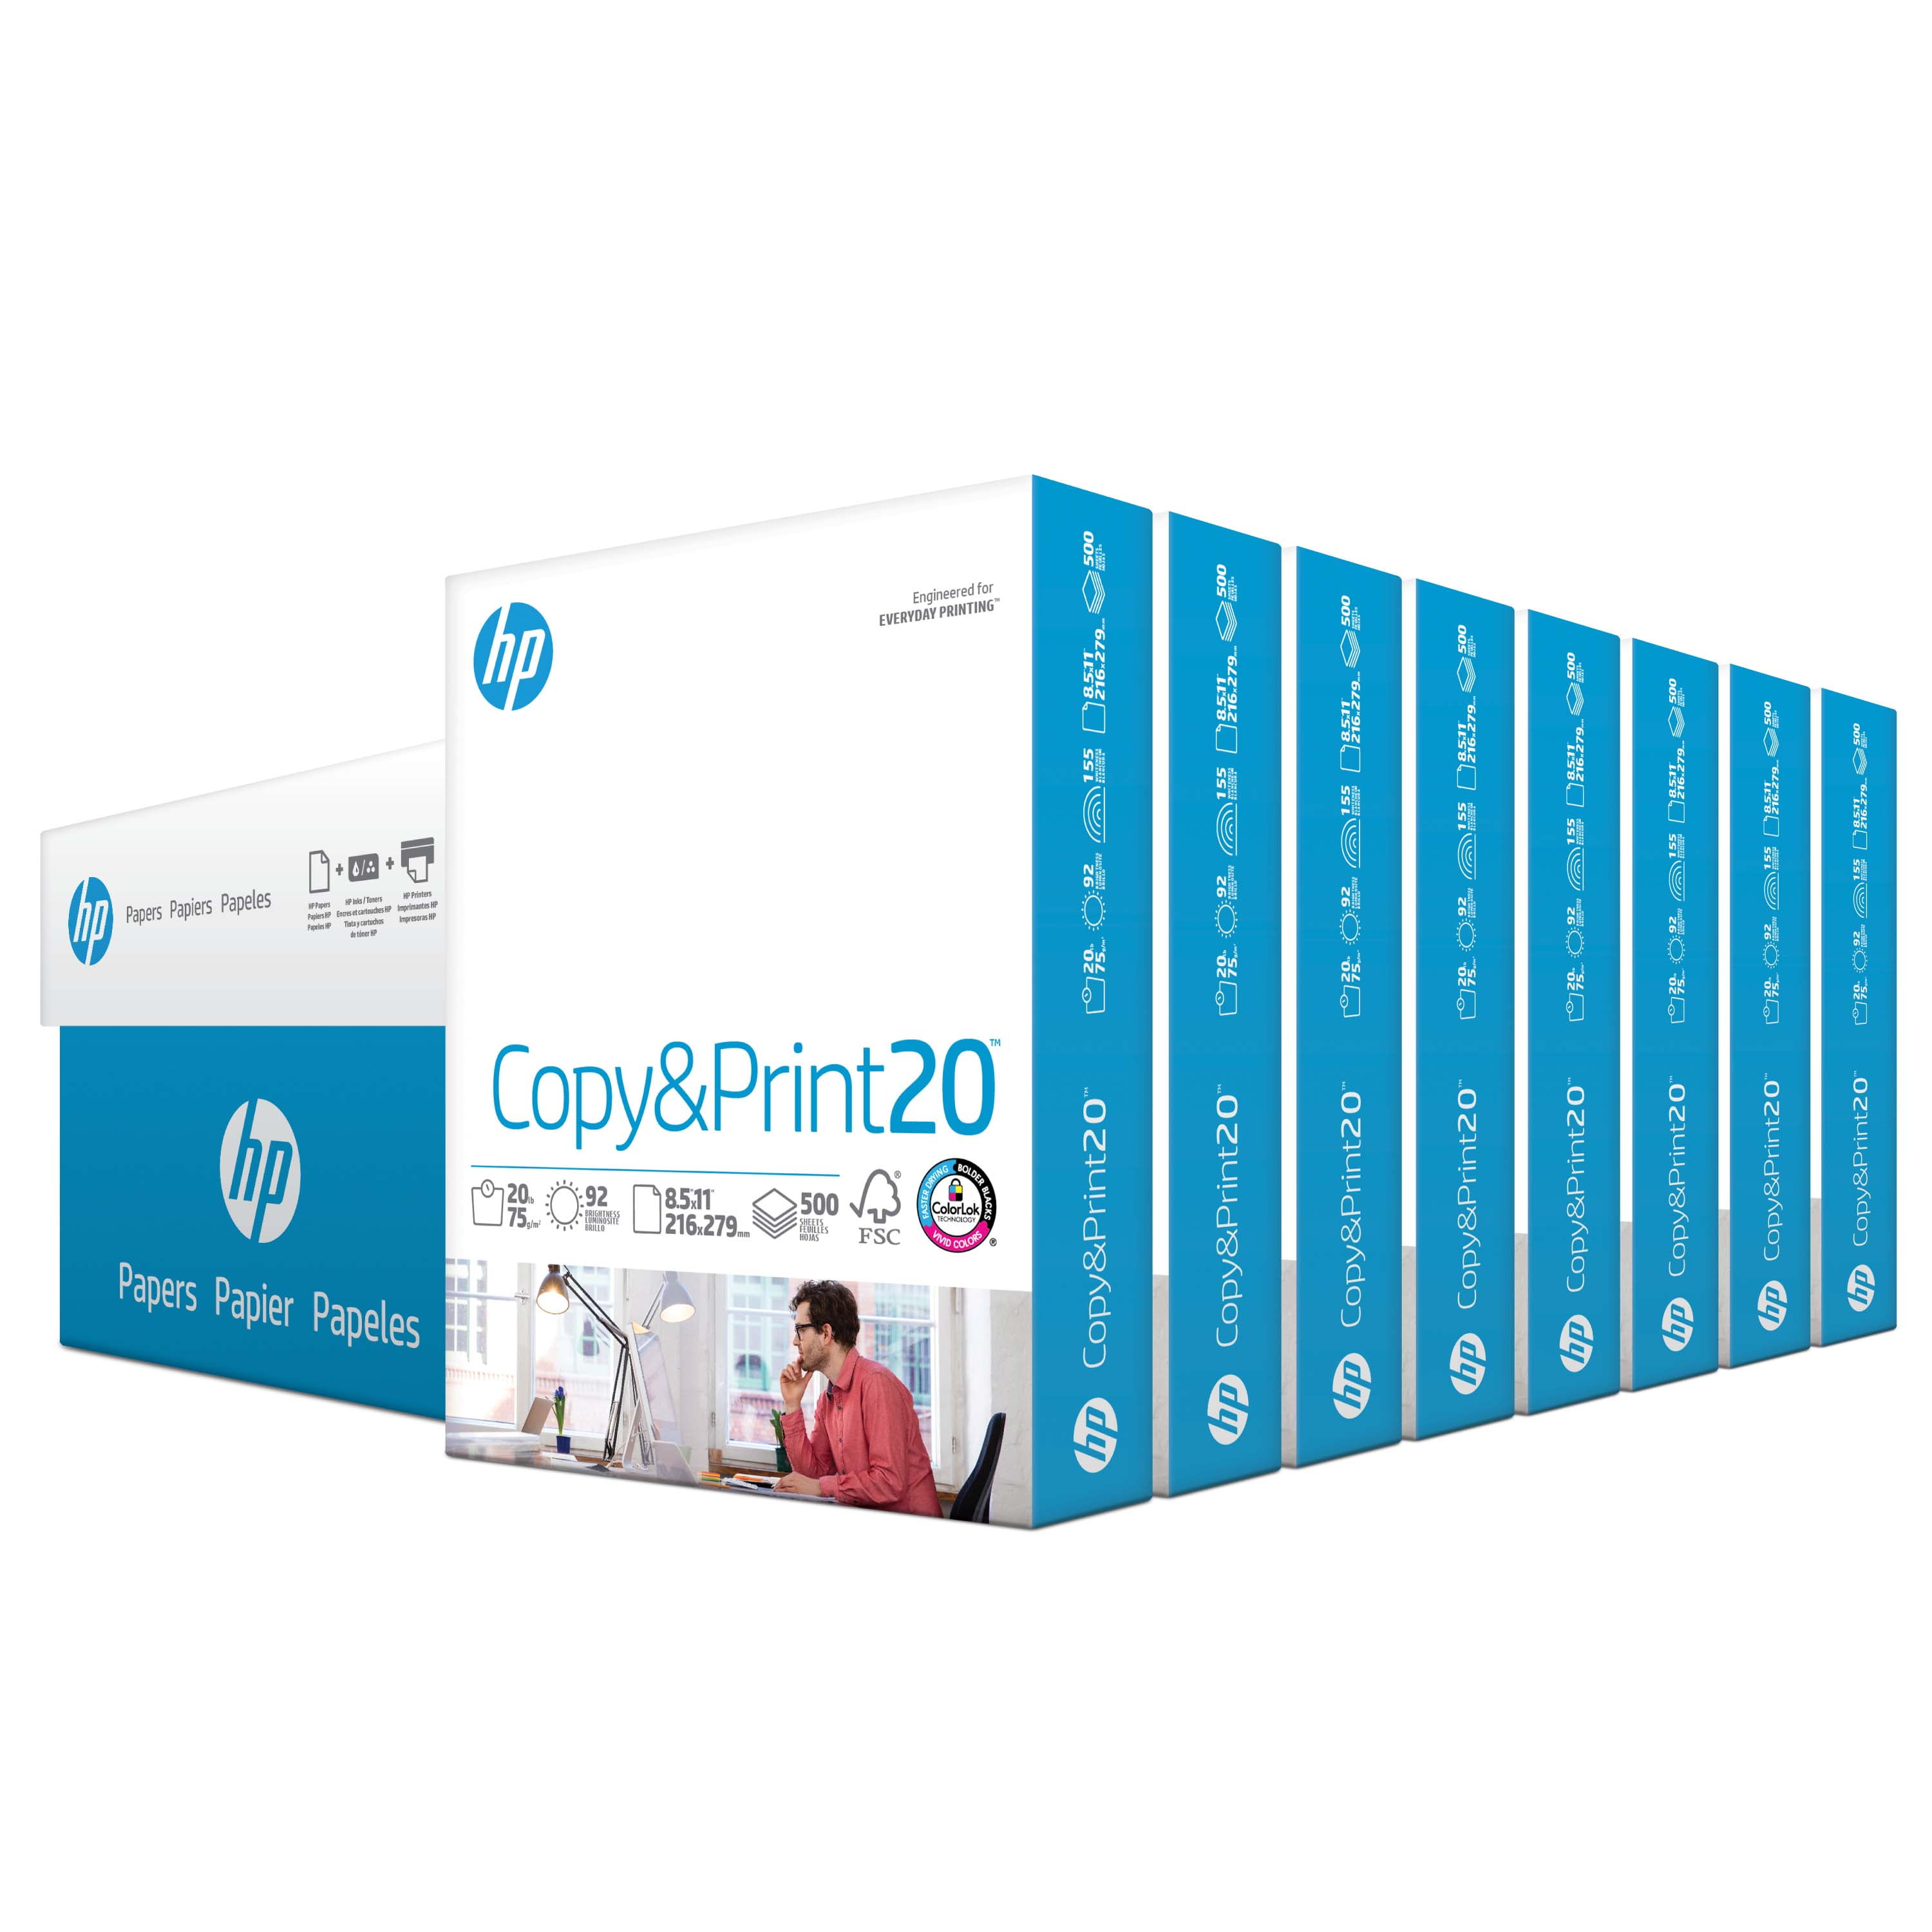 HP Multi Use20 Printer Copier Paper Letter Size 8 12 x 11 Ream Of 500  Sheets 20 Lb Ultra White - Office Depot